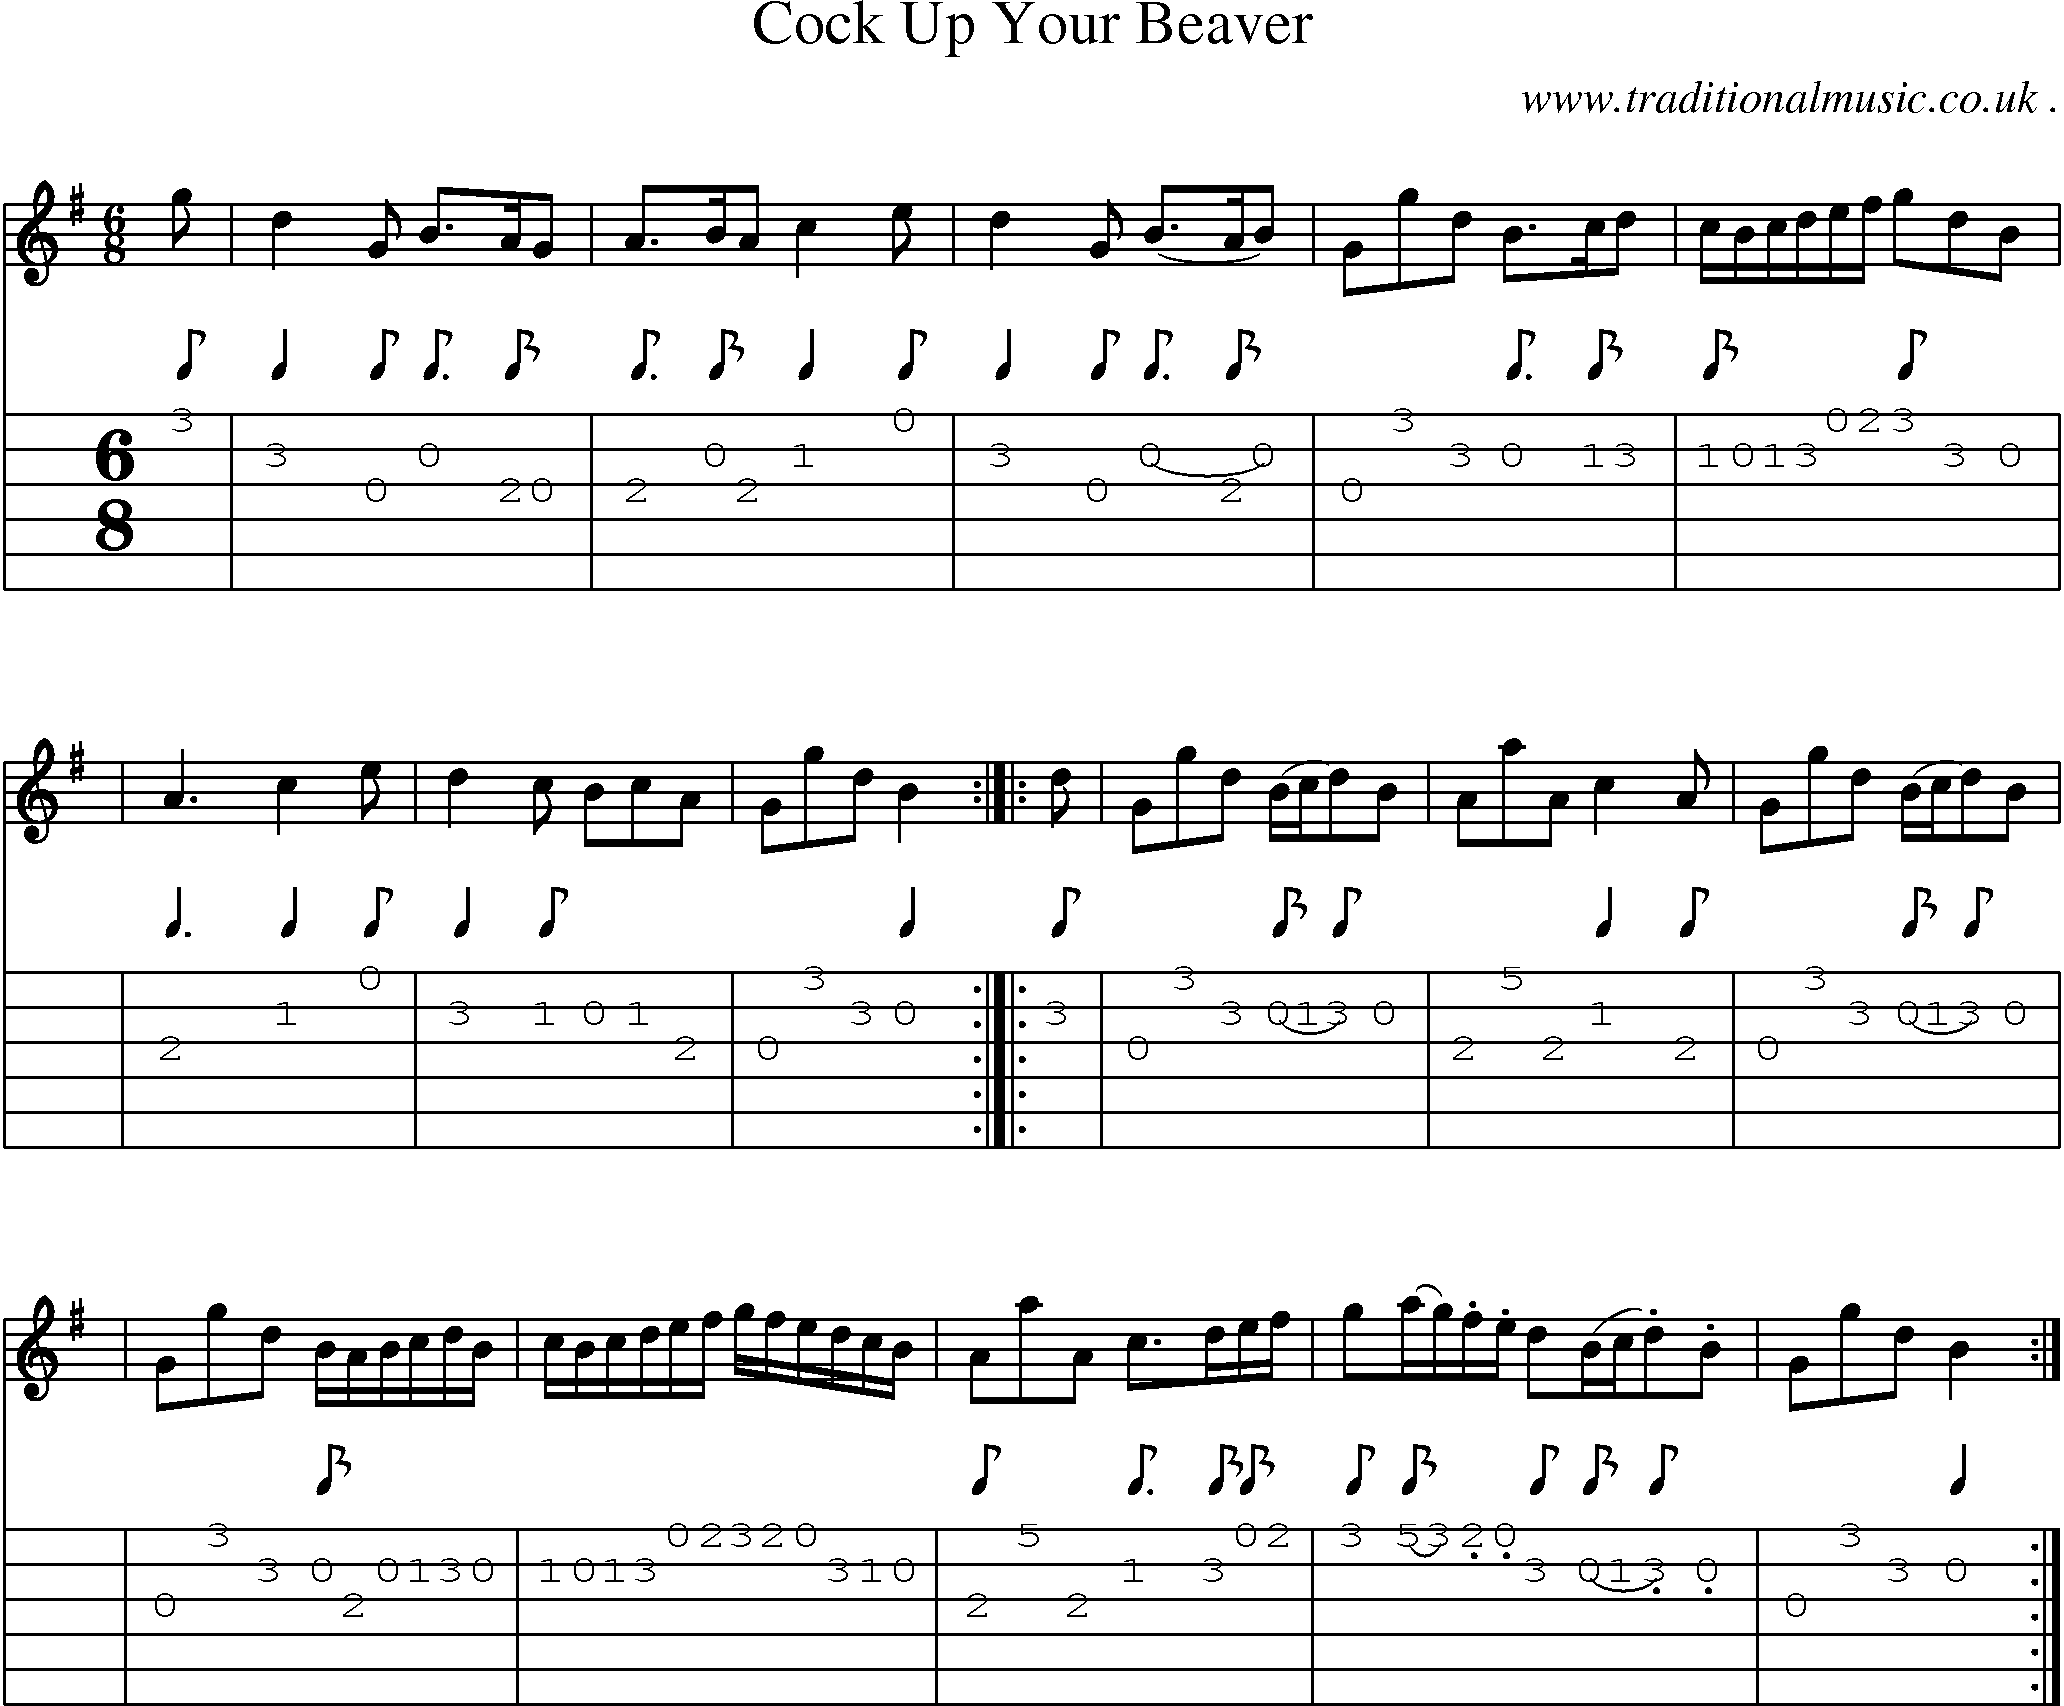 Sheet-music  score, Chords and Guitar Tabs for Cock Up Your Beaver